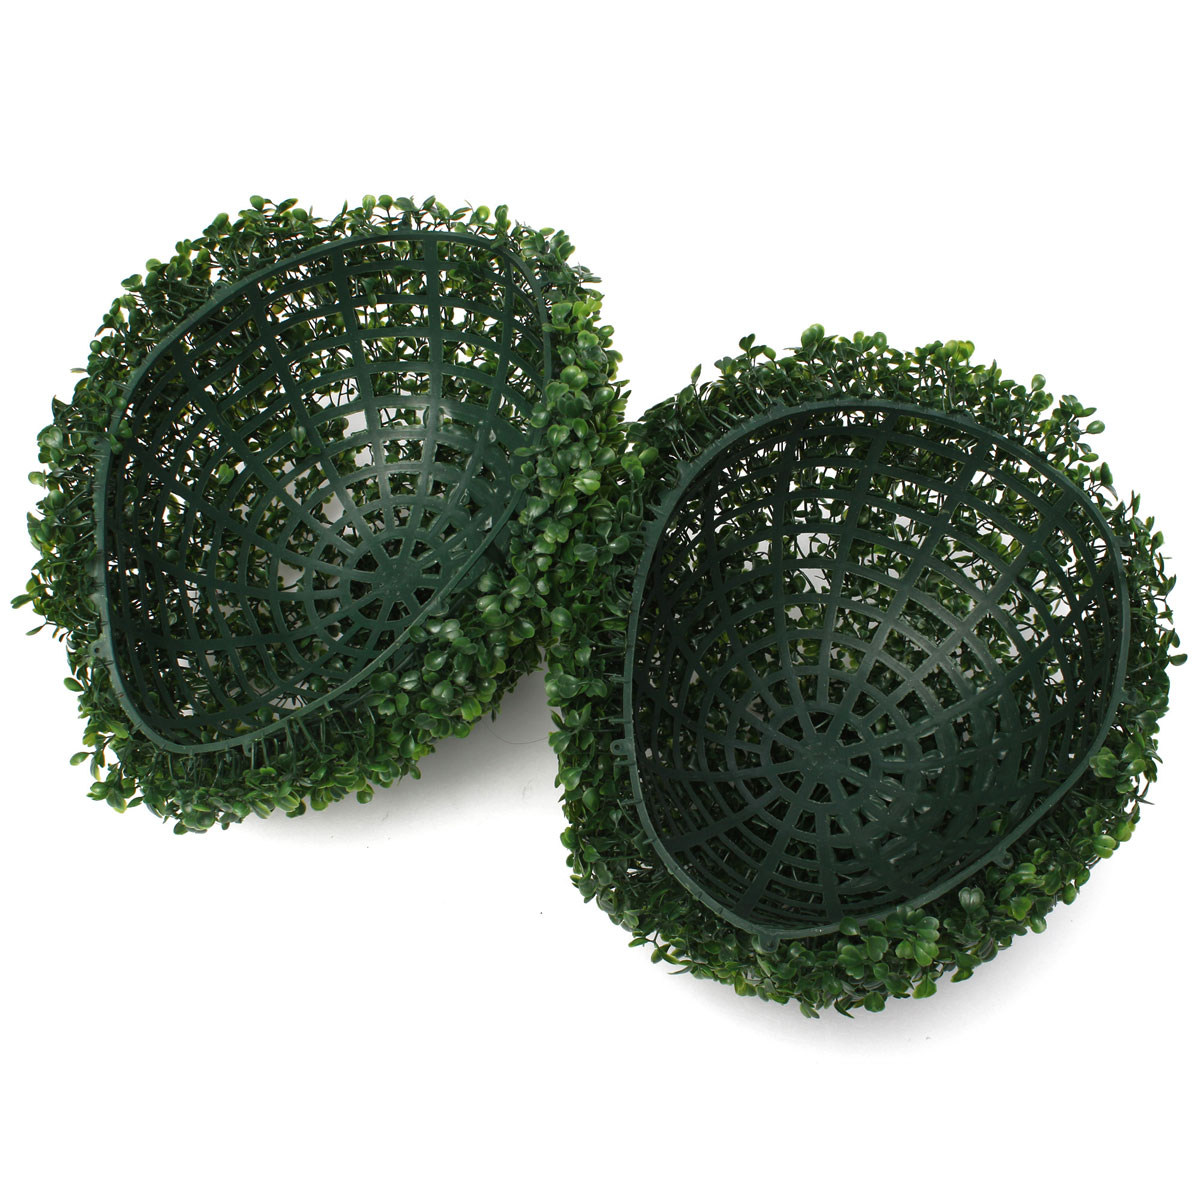 35cm-Plastic-Artificial-Topiary-Grass-Ball-Leaf-Effect-Ball-Wedding-Gardening-Hanging-Decoration-1036994-8